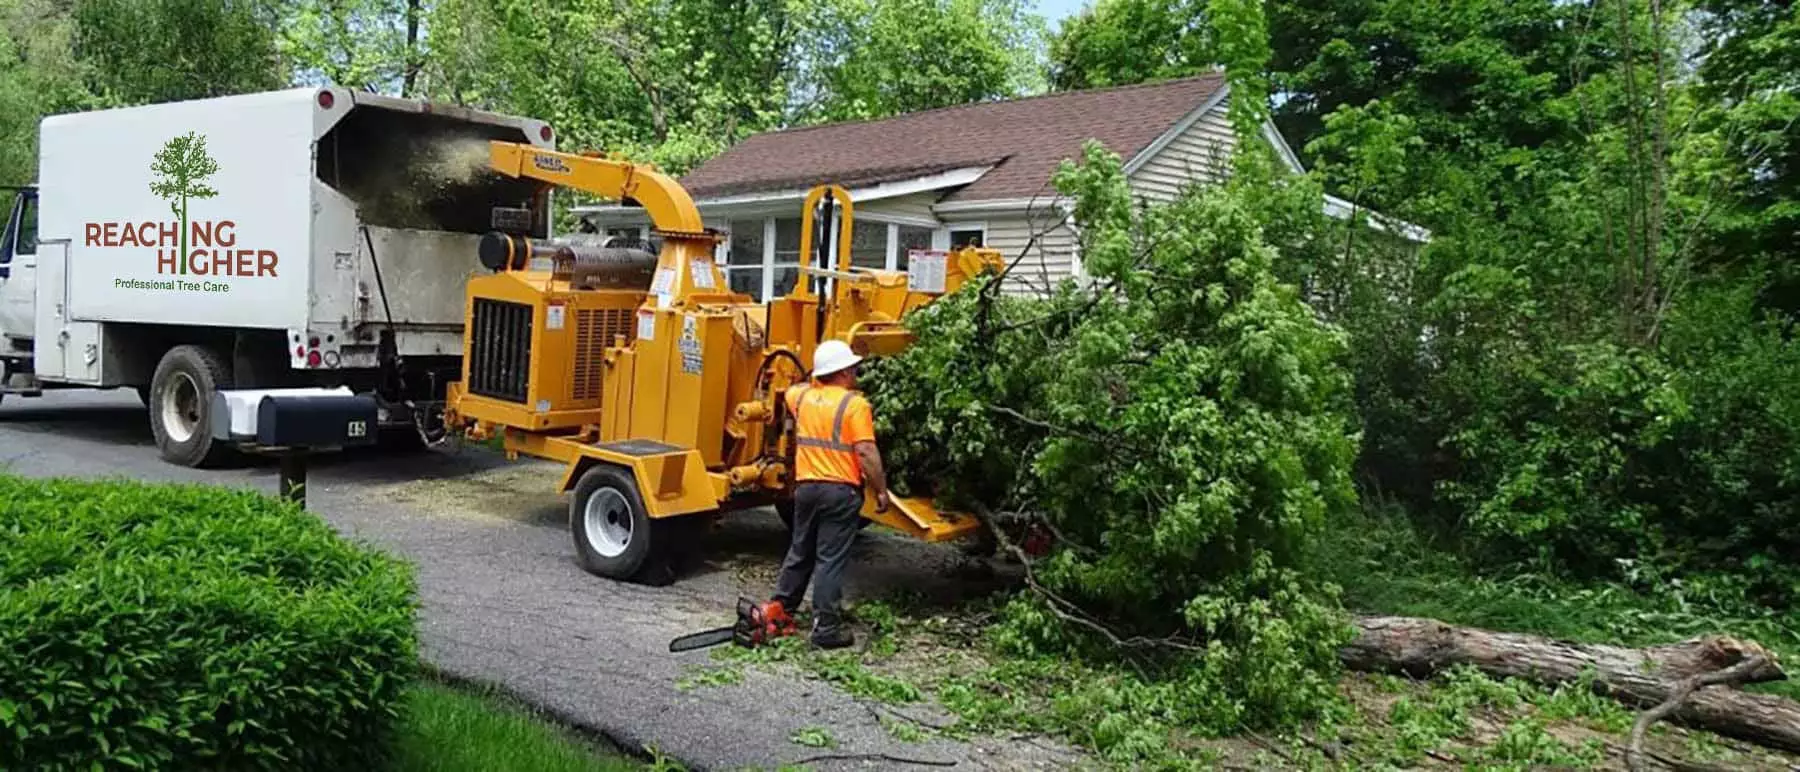 Reaching Higher Professional Tree Care is currently closed for business. We hope to re-open at the end of 2024.